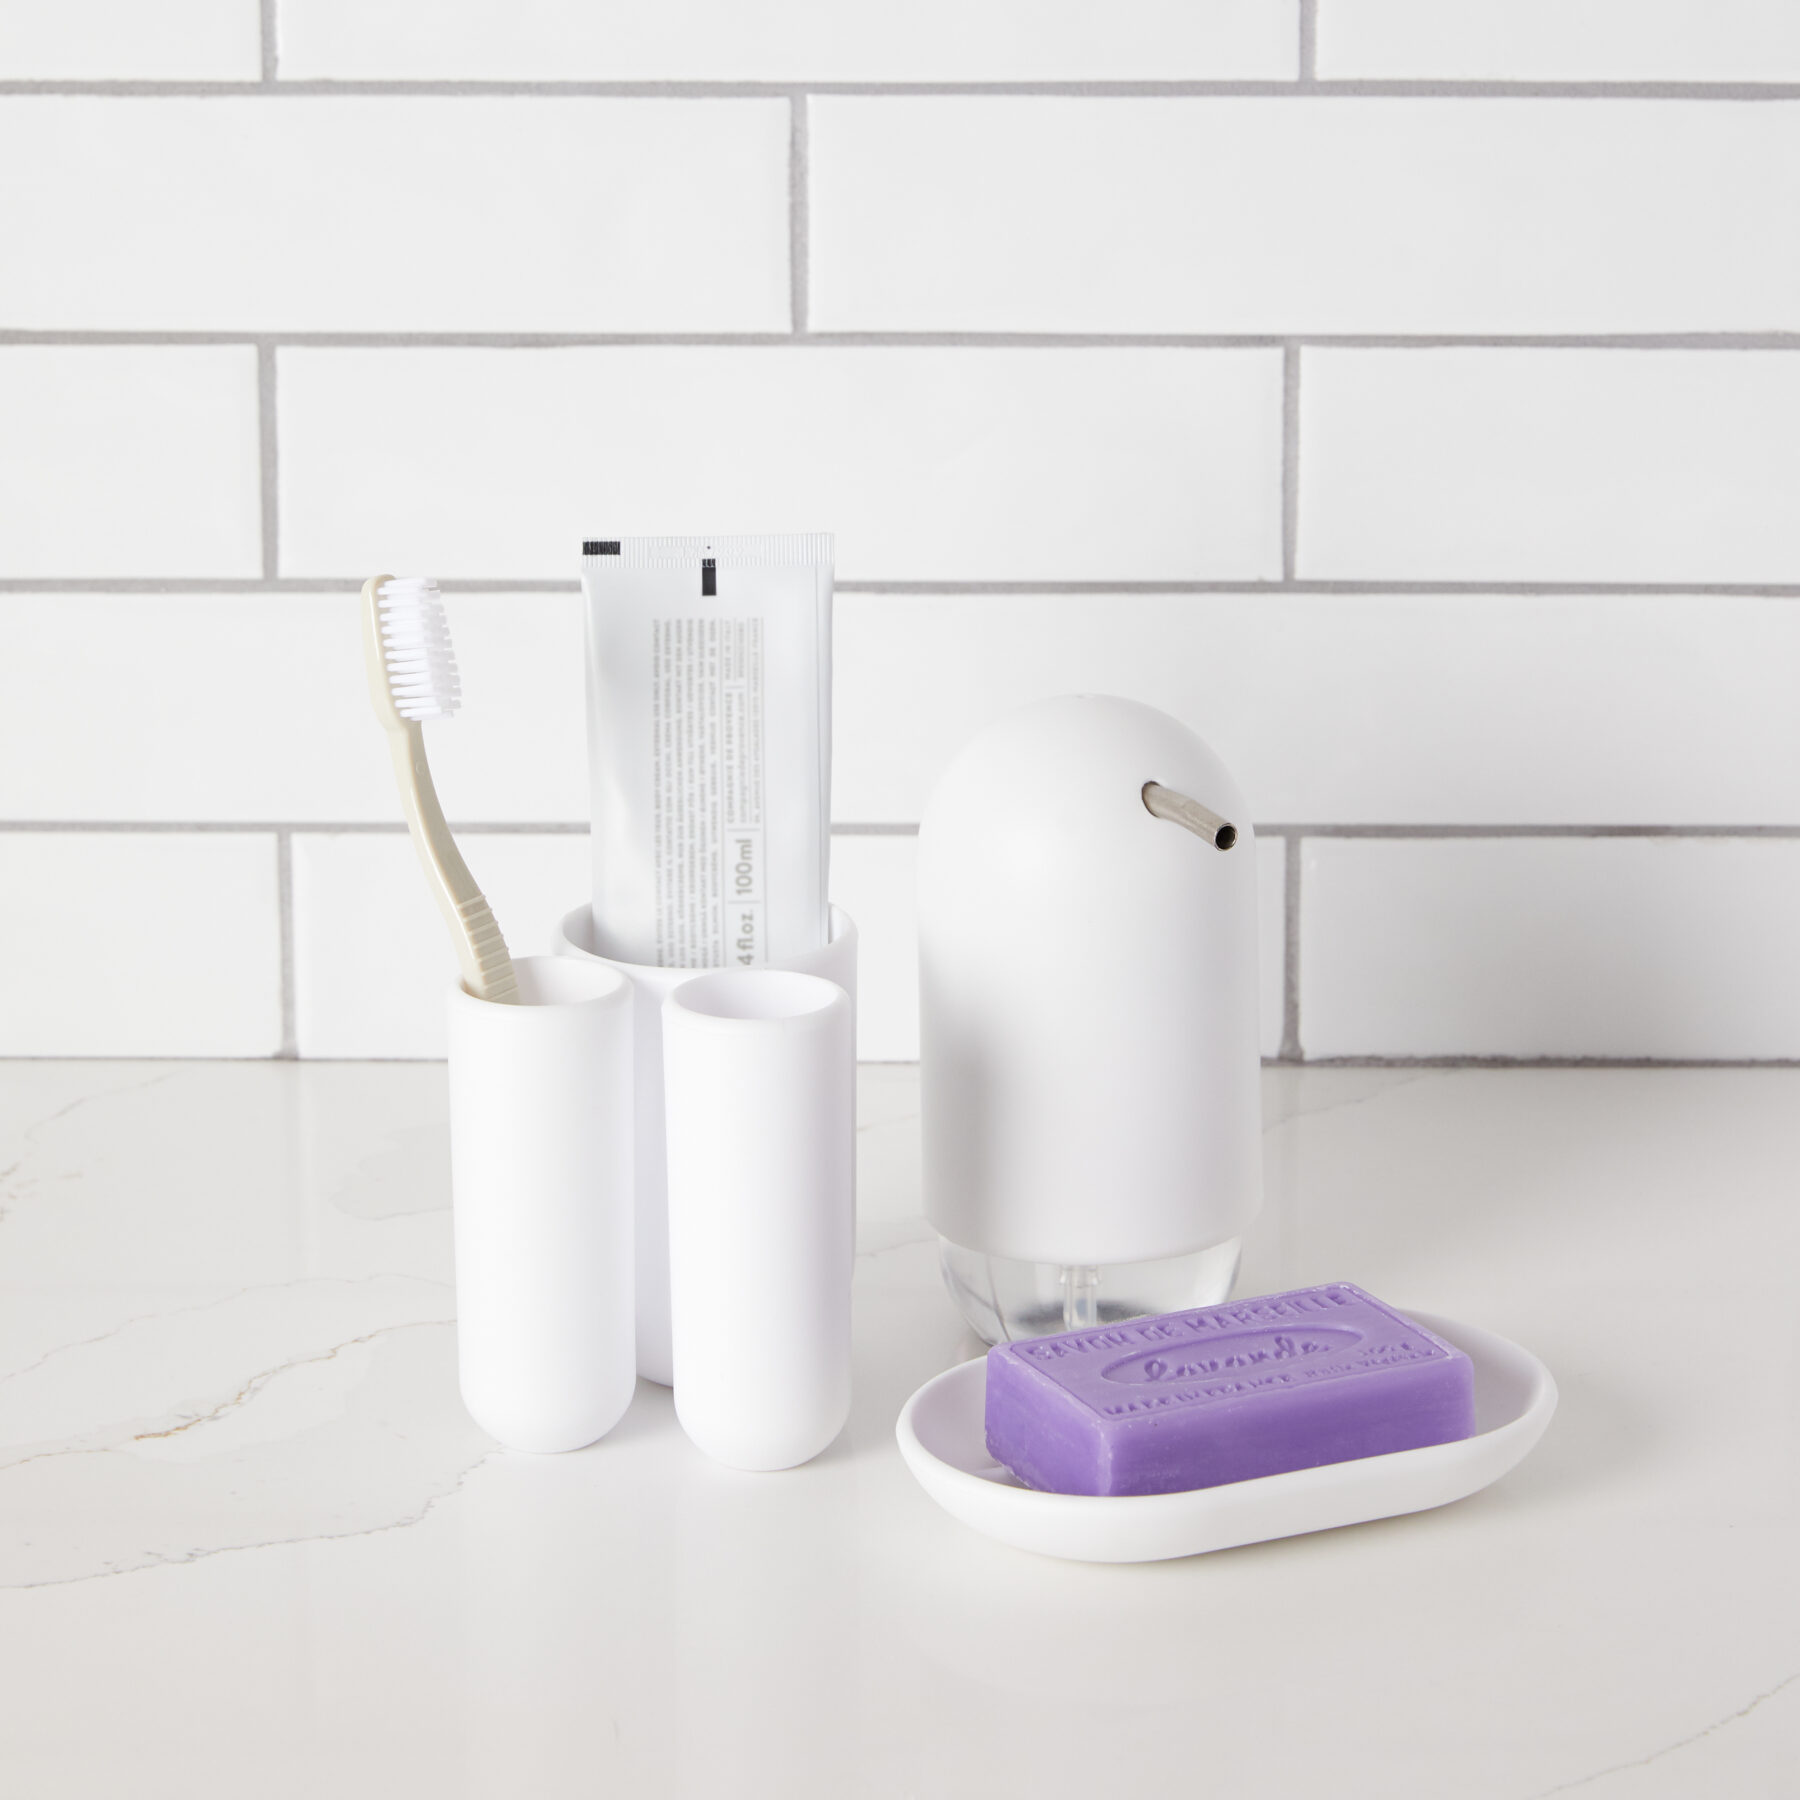 Touch Soap Dish by Umbra is a sleek and compact soap dish that will look great sitting out on your counter